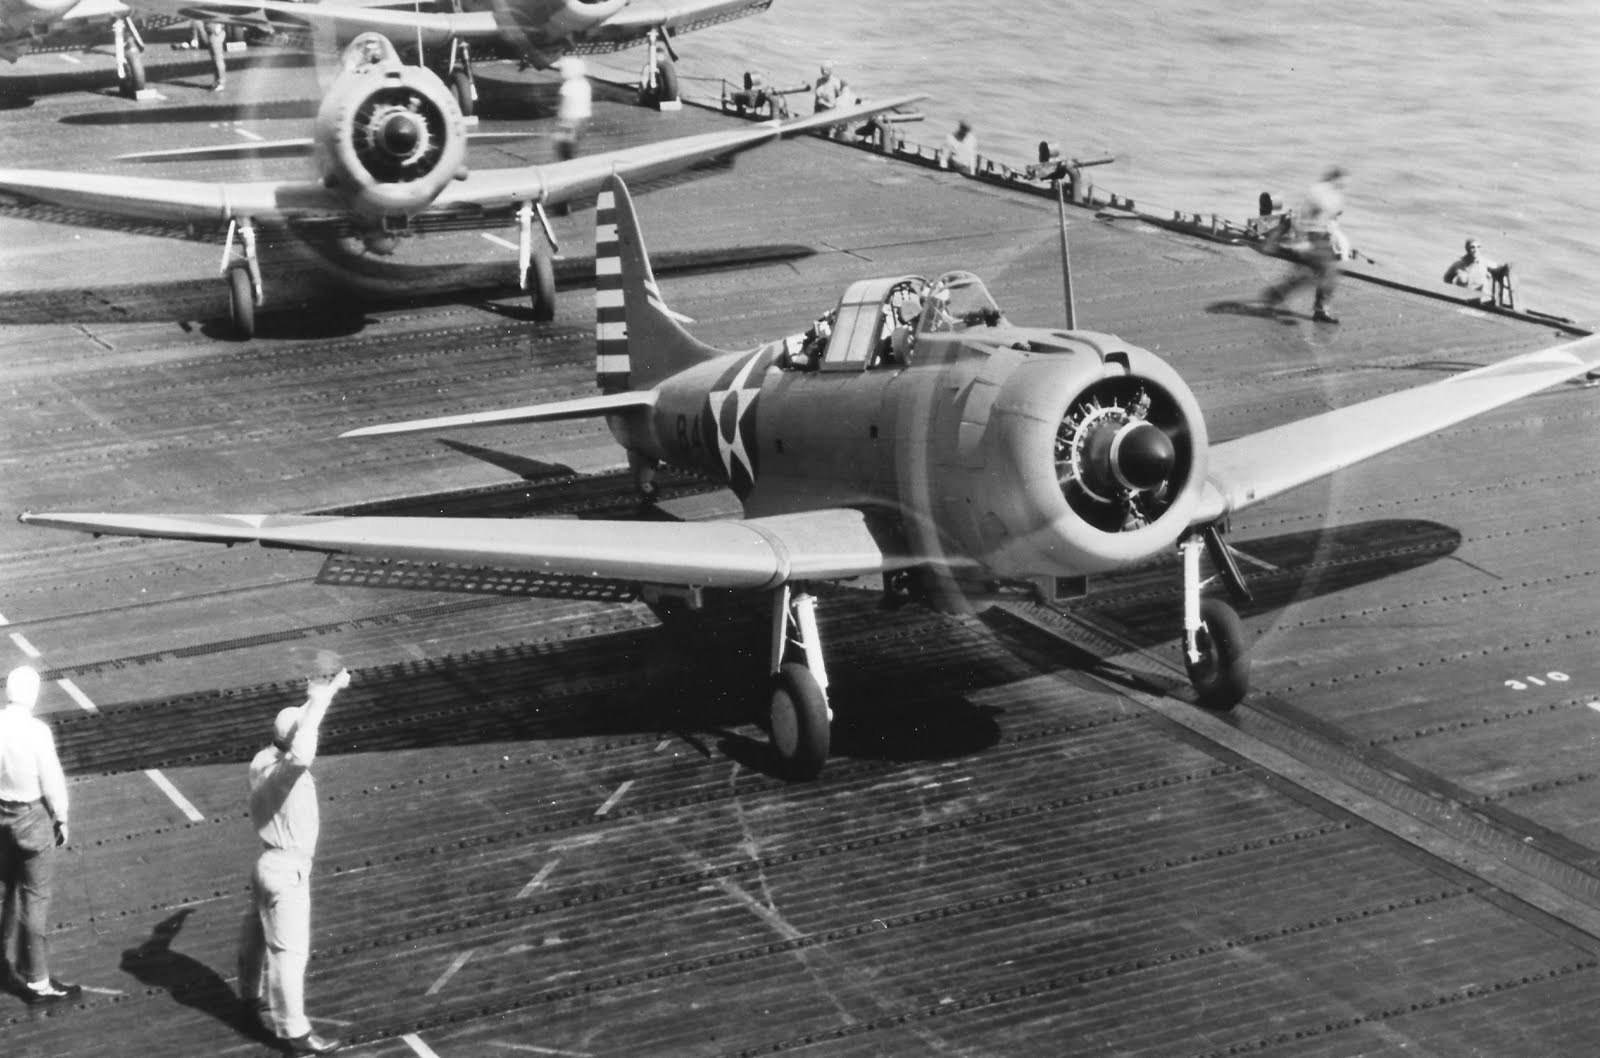 An SBD-3 Dauntless dive-bomber of Bombing Squadron 6 prepares for launch from the carrier USS Enterprise, early 1942.